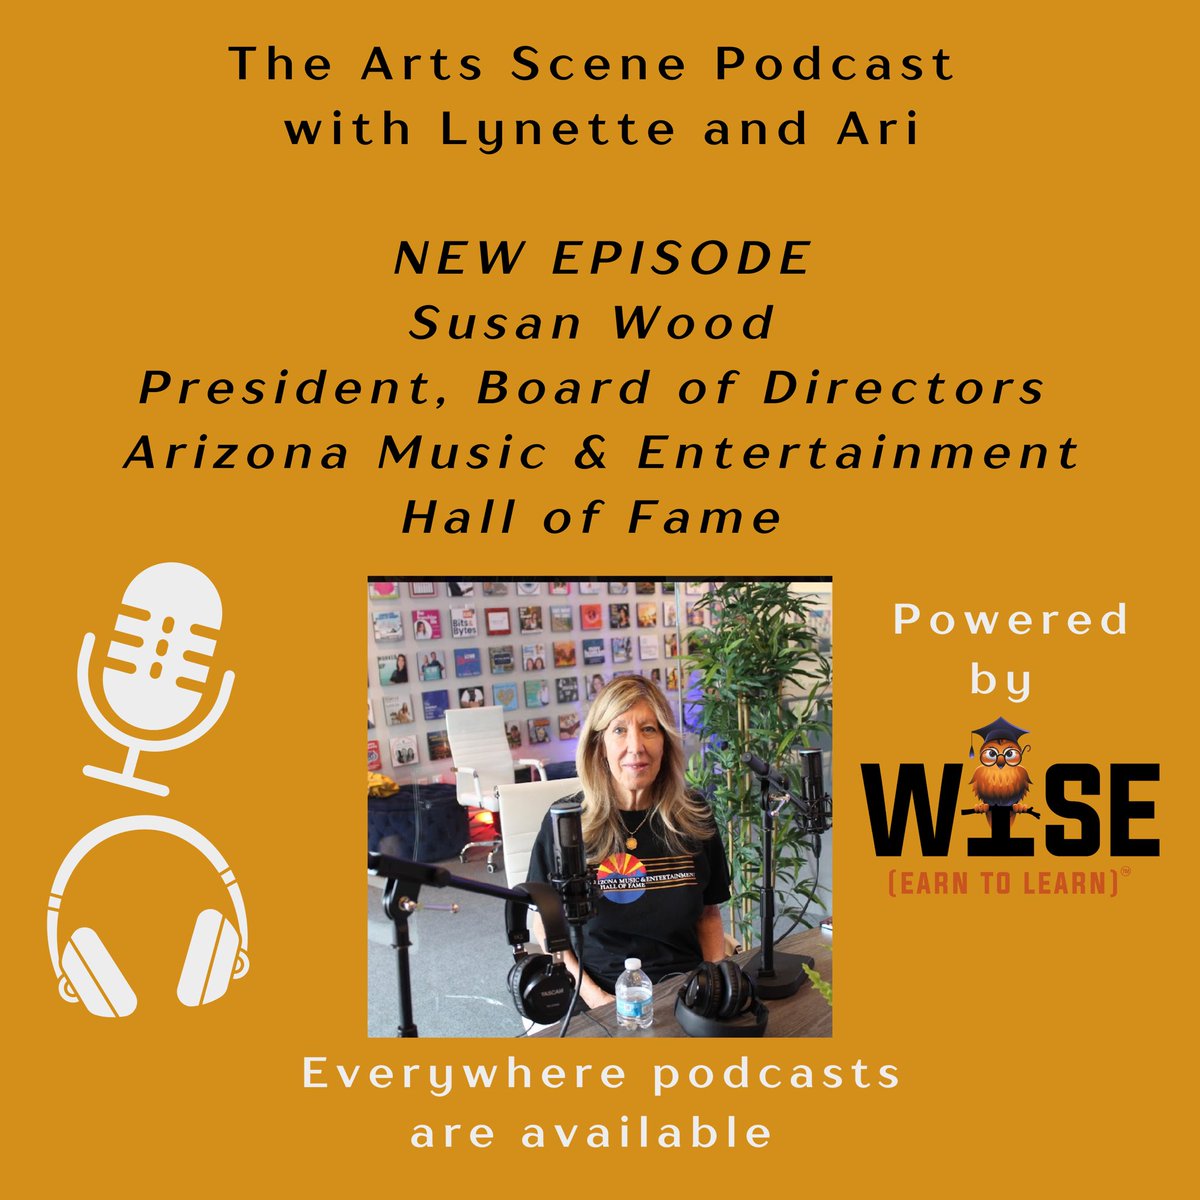 Our latest episode features Susan Wood, president of the BOD for the Arizona Music & Entertainment Hall of Fame who talks about the upcoming induction ceremony, July 16 at Madison Center for the Arts > podcasts.apple.com/us/podcast/the… #theartsscenepodcast